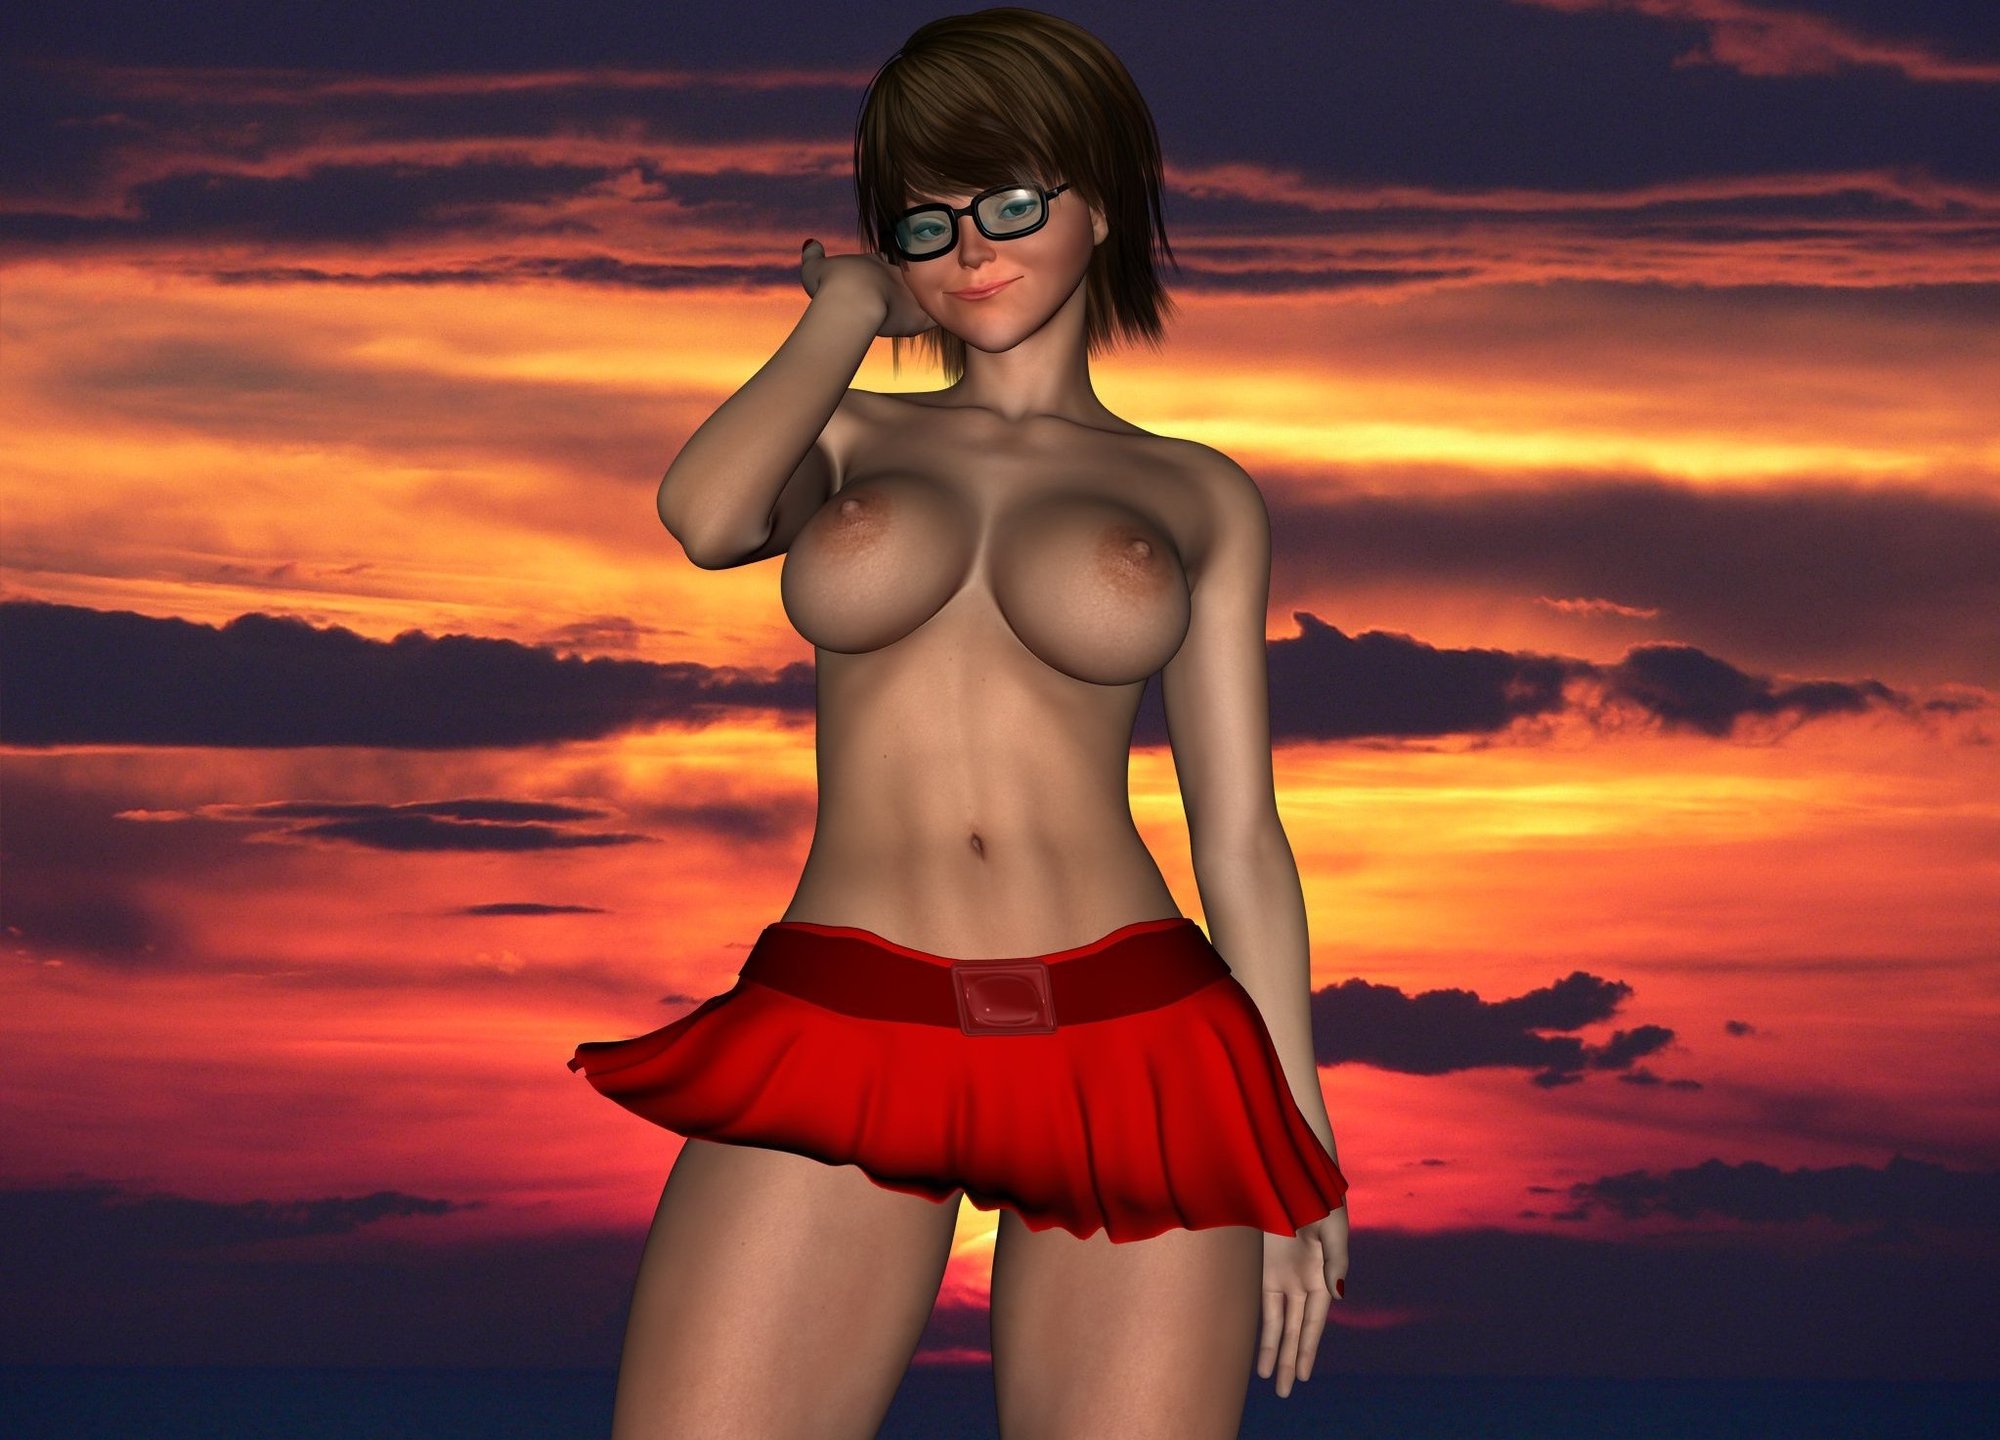 best of Cock free velma scooby takes poses